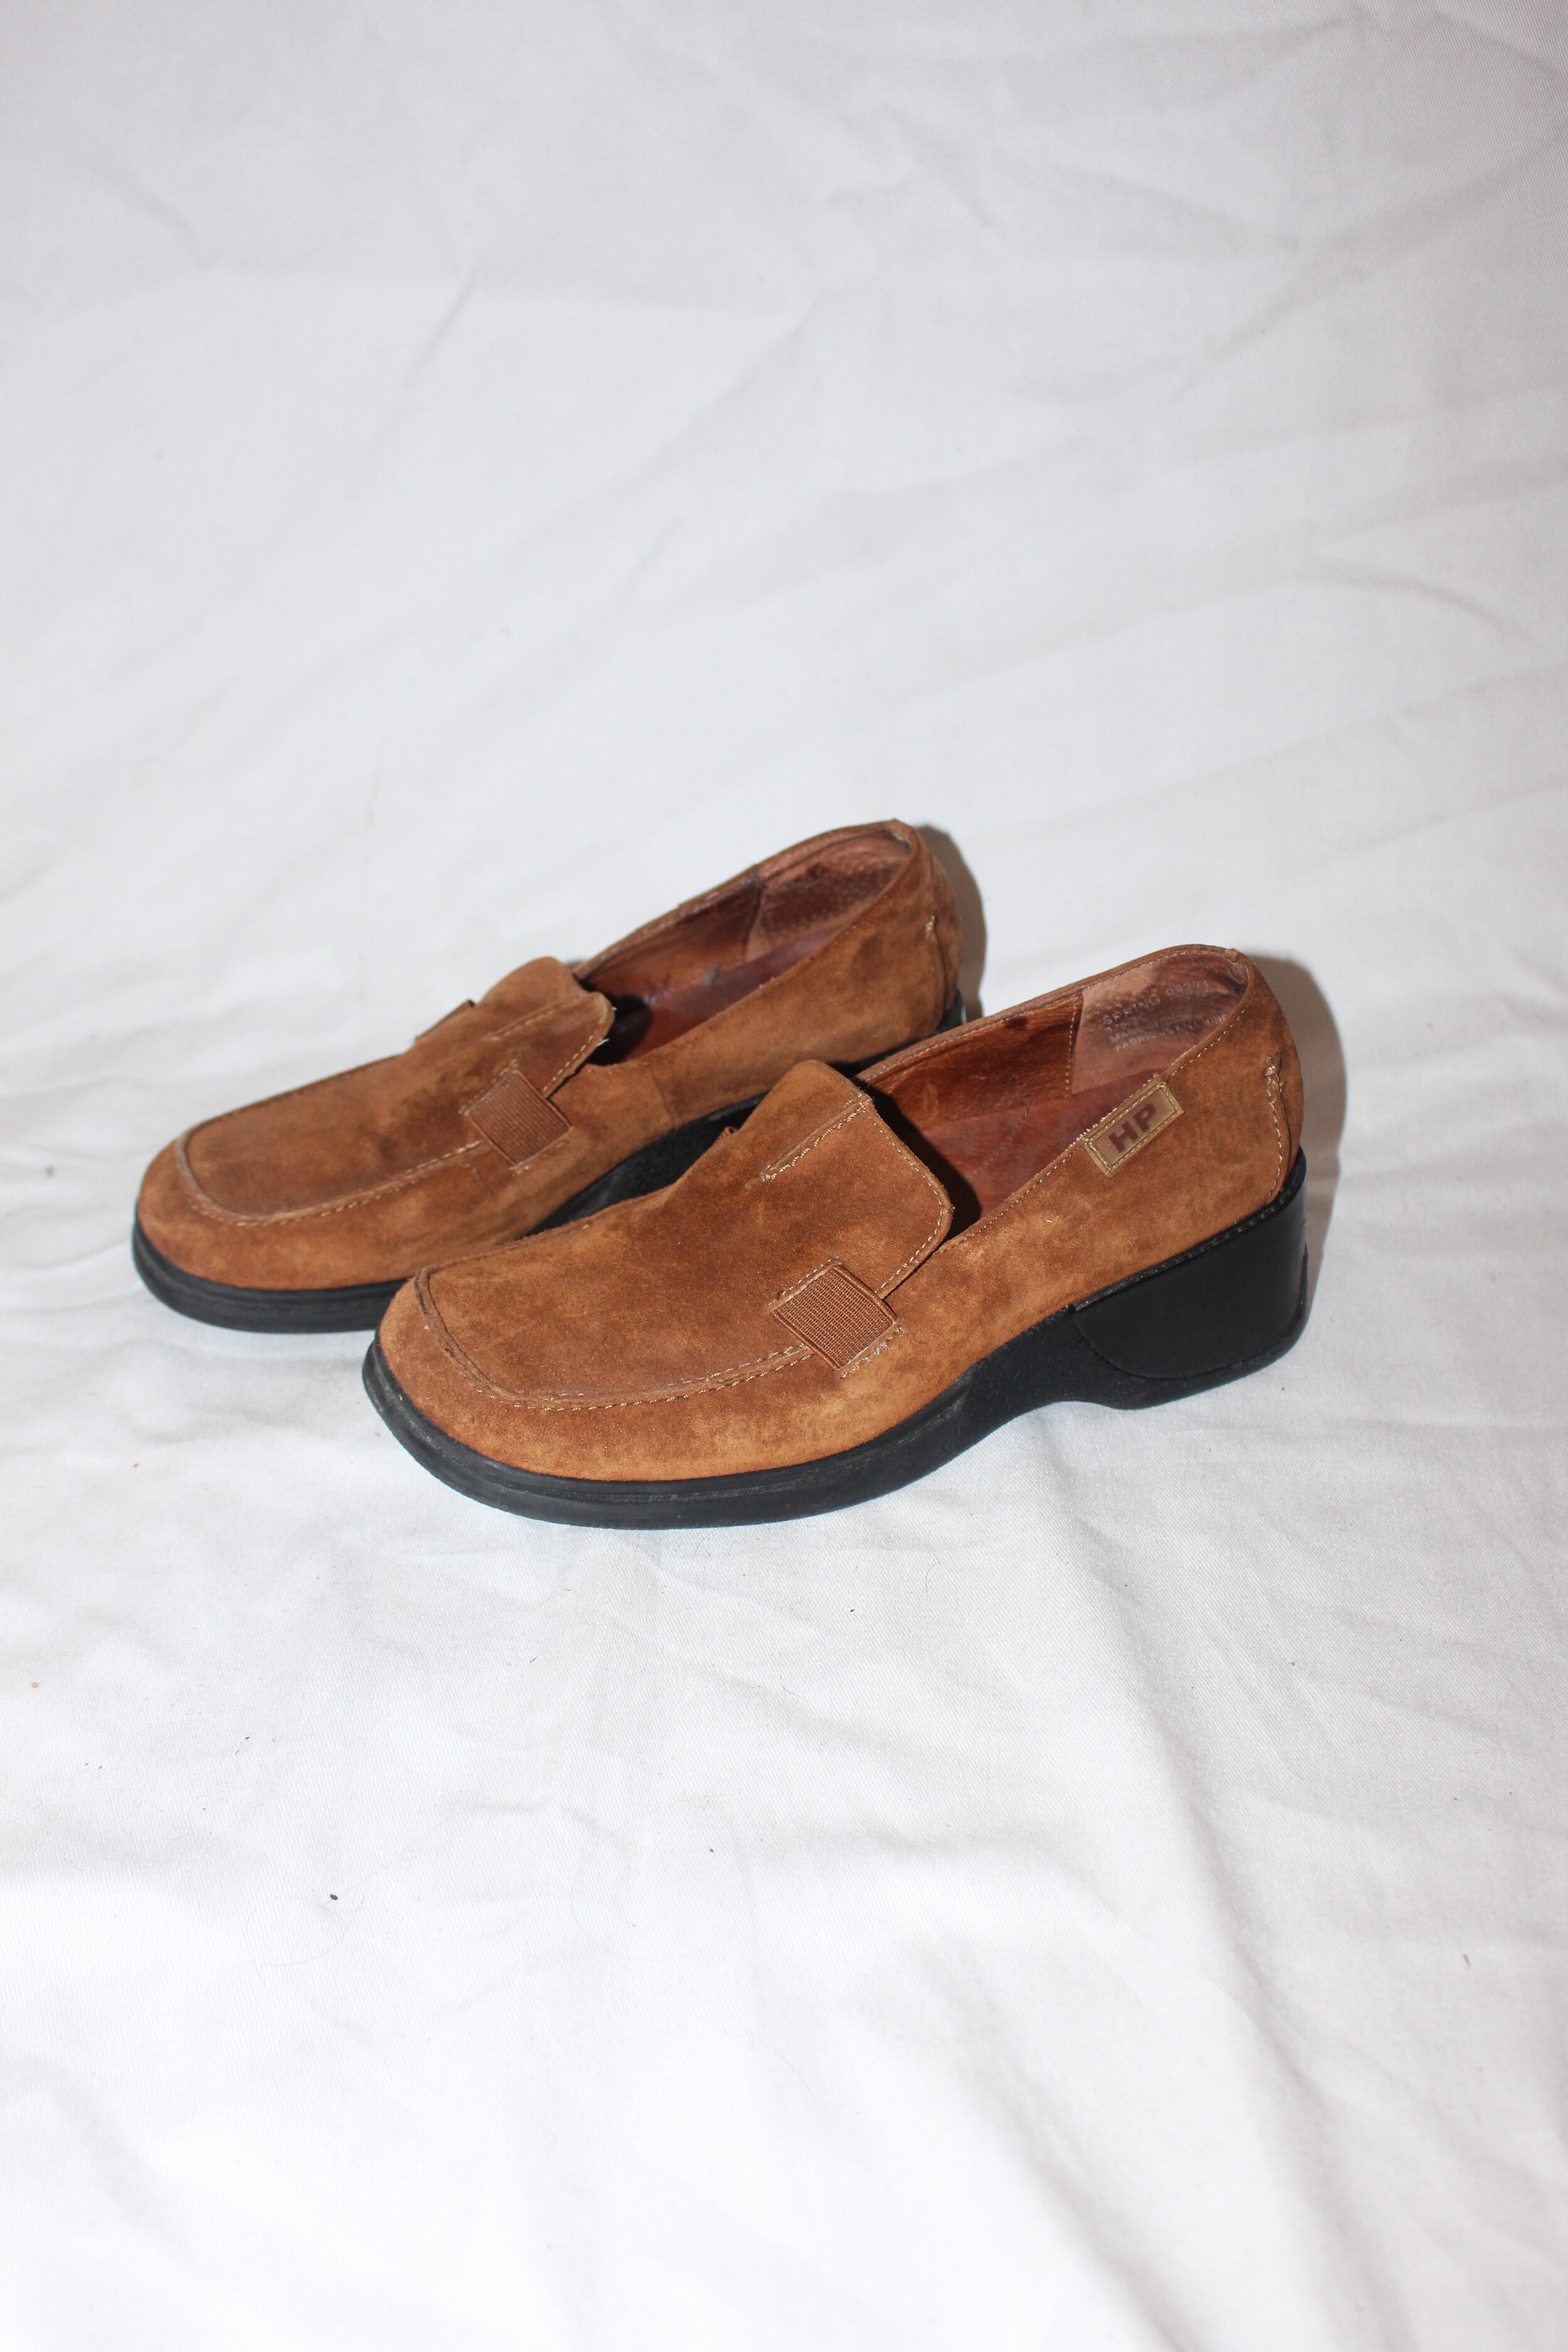 hush puppies suede loafers